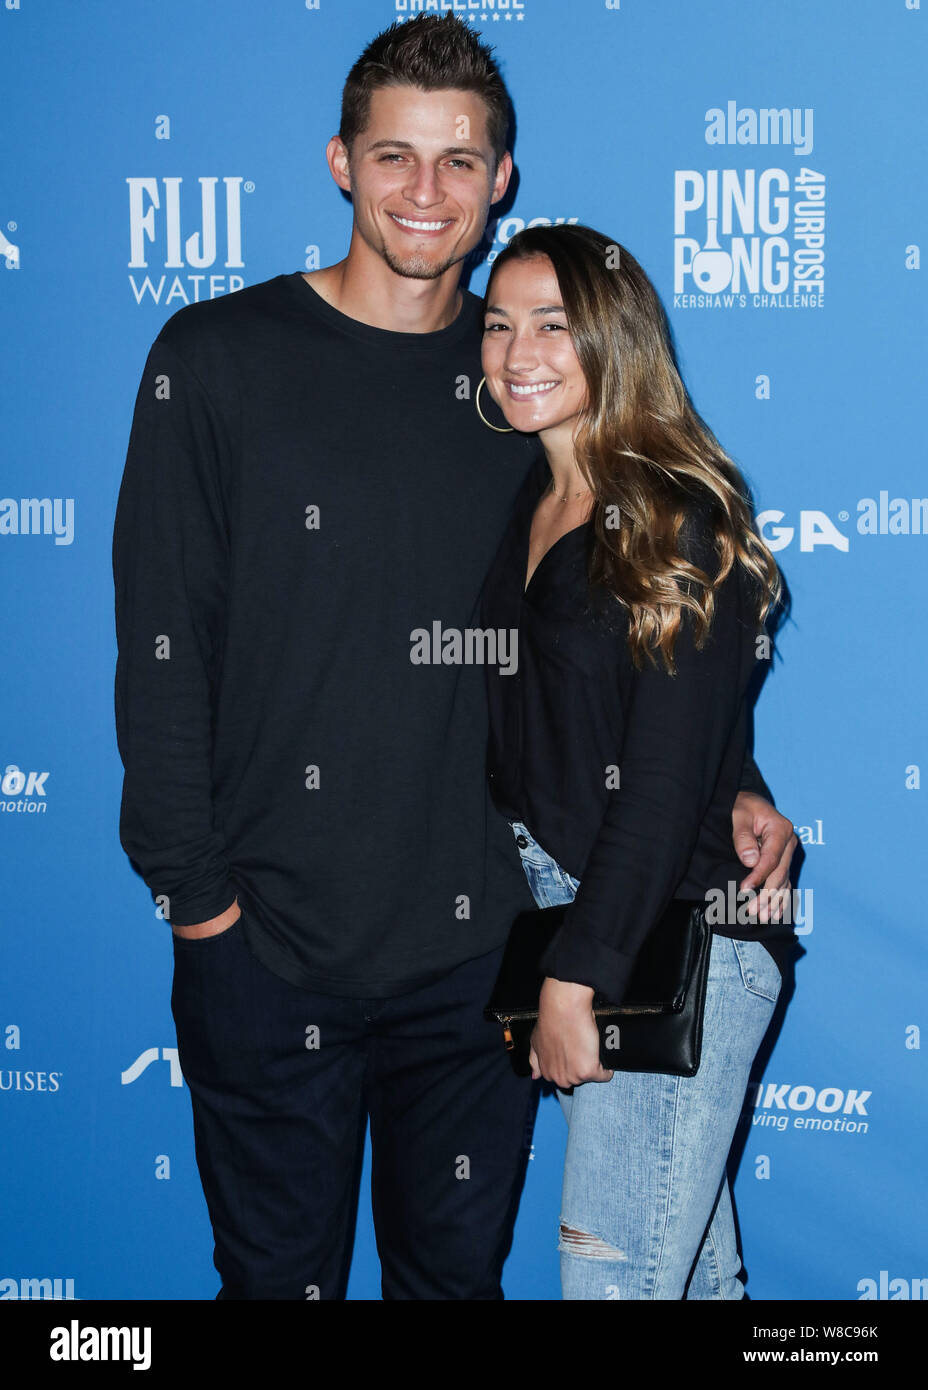 Los Angeles, United States. 08th Aug, 2019. LOS ANGELES, CALIFORNIA, USA - AUGUST 08: Professional baseball shortstop Corey Seager and girlfriend Madisyn Van Ham arrive at Clayton Kershaw's 7th Annual Ping Pong 4 Purpose Fundraiser held at Dodger Stadium on August 8, 2019 in Los Angeles, California, United States. (Photo by Xavier Collin/Image Press Agency) Credit: Image Press Agency/Alamy Live News Stock Photo